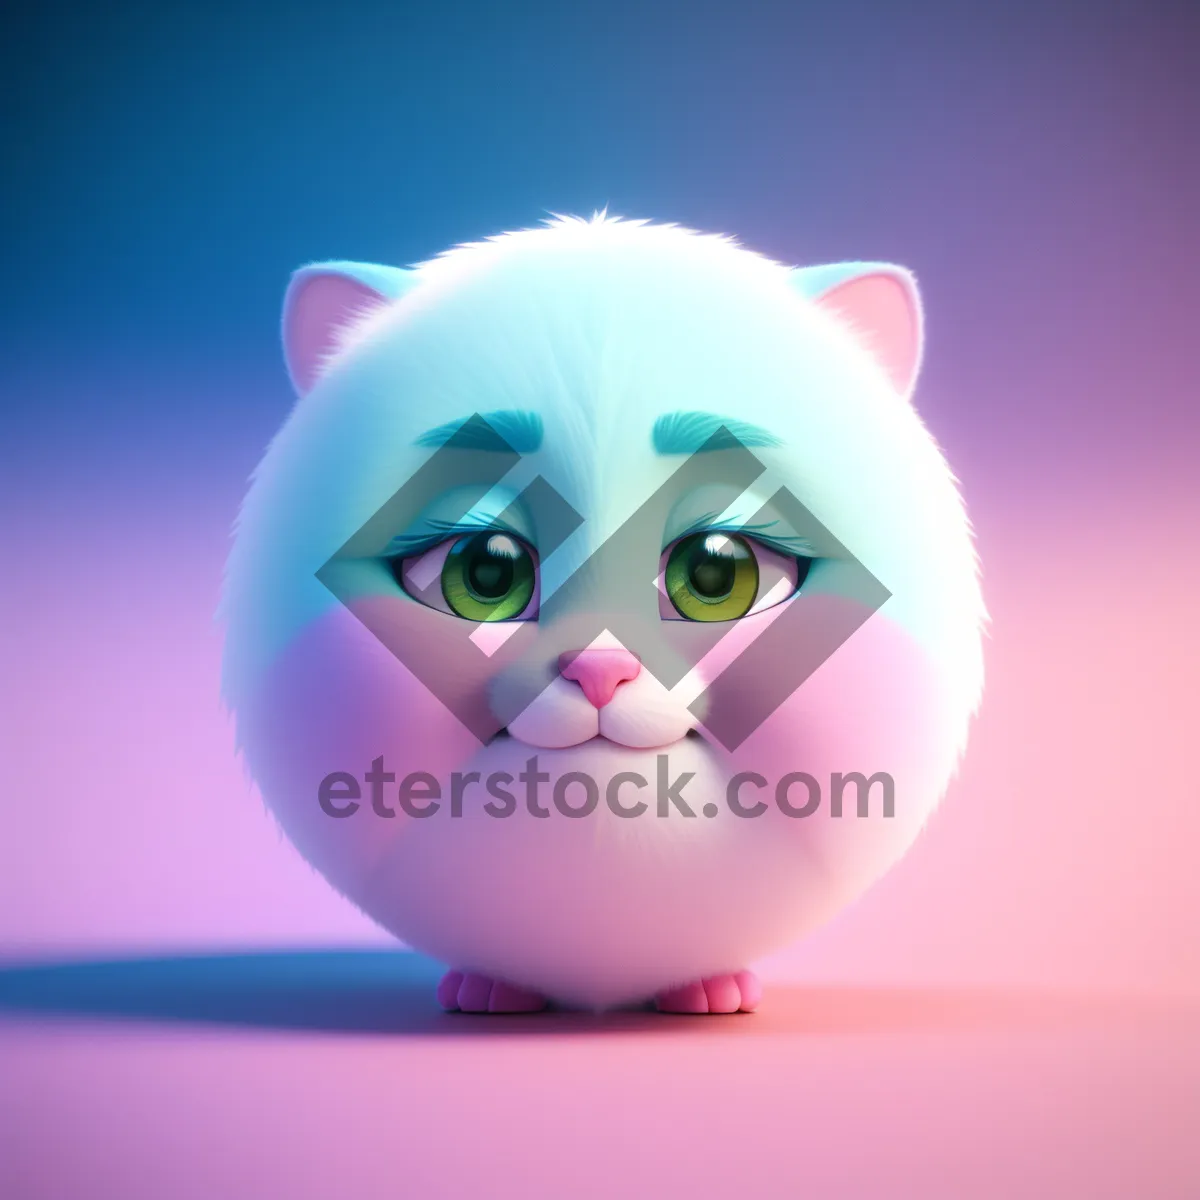 Picture of Cute Pink Piggy Bank Cartoon Image